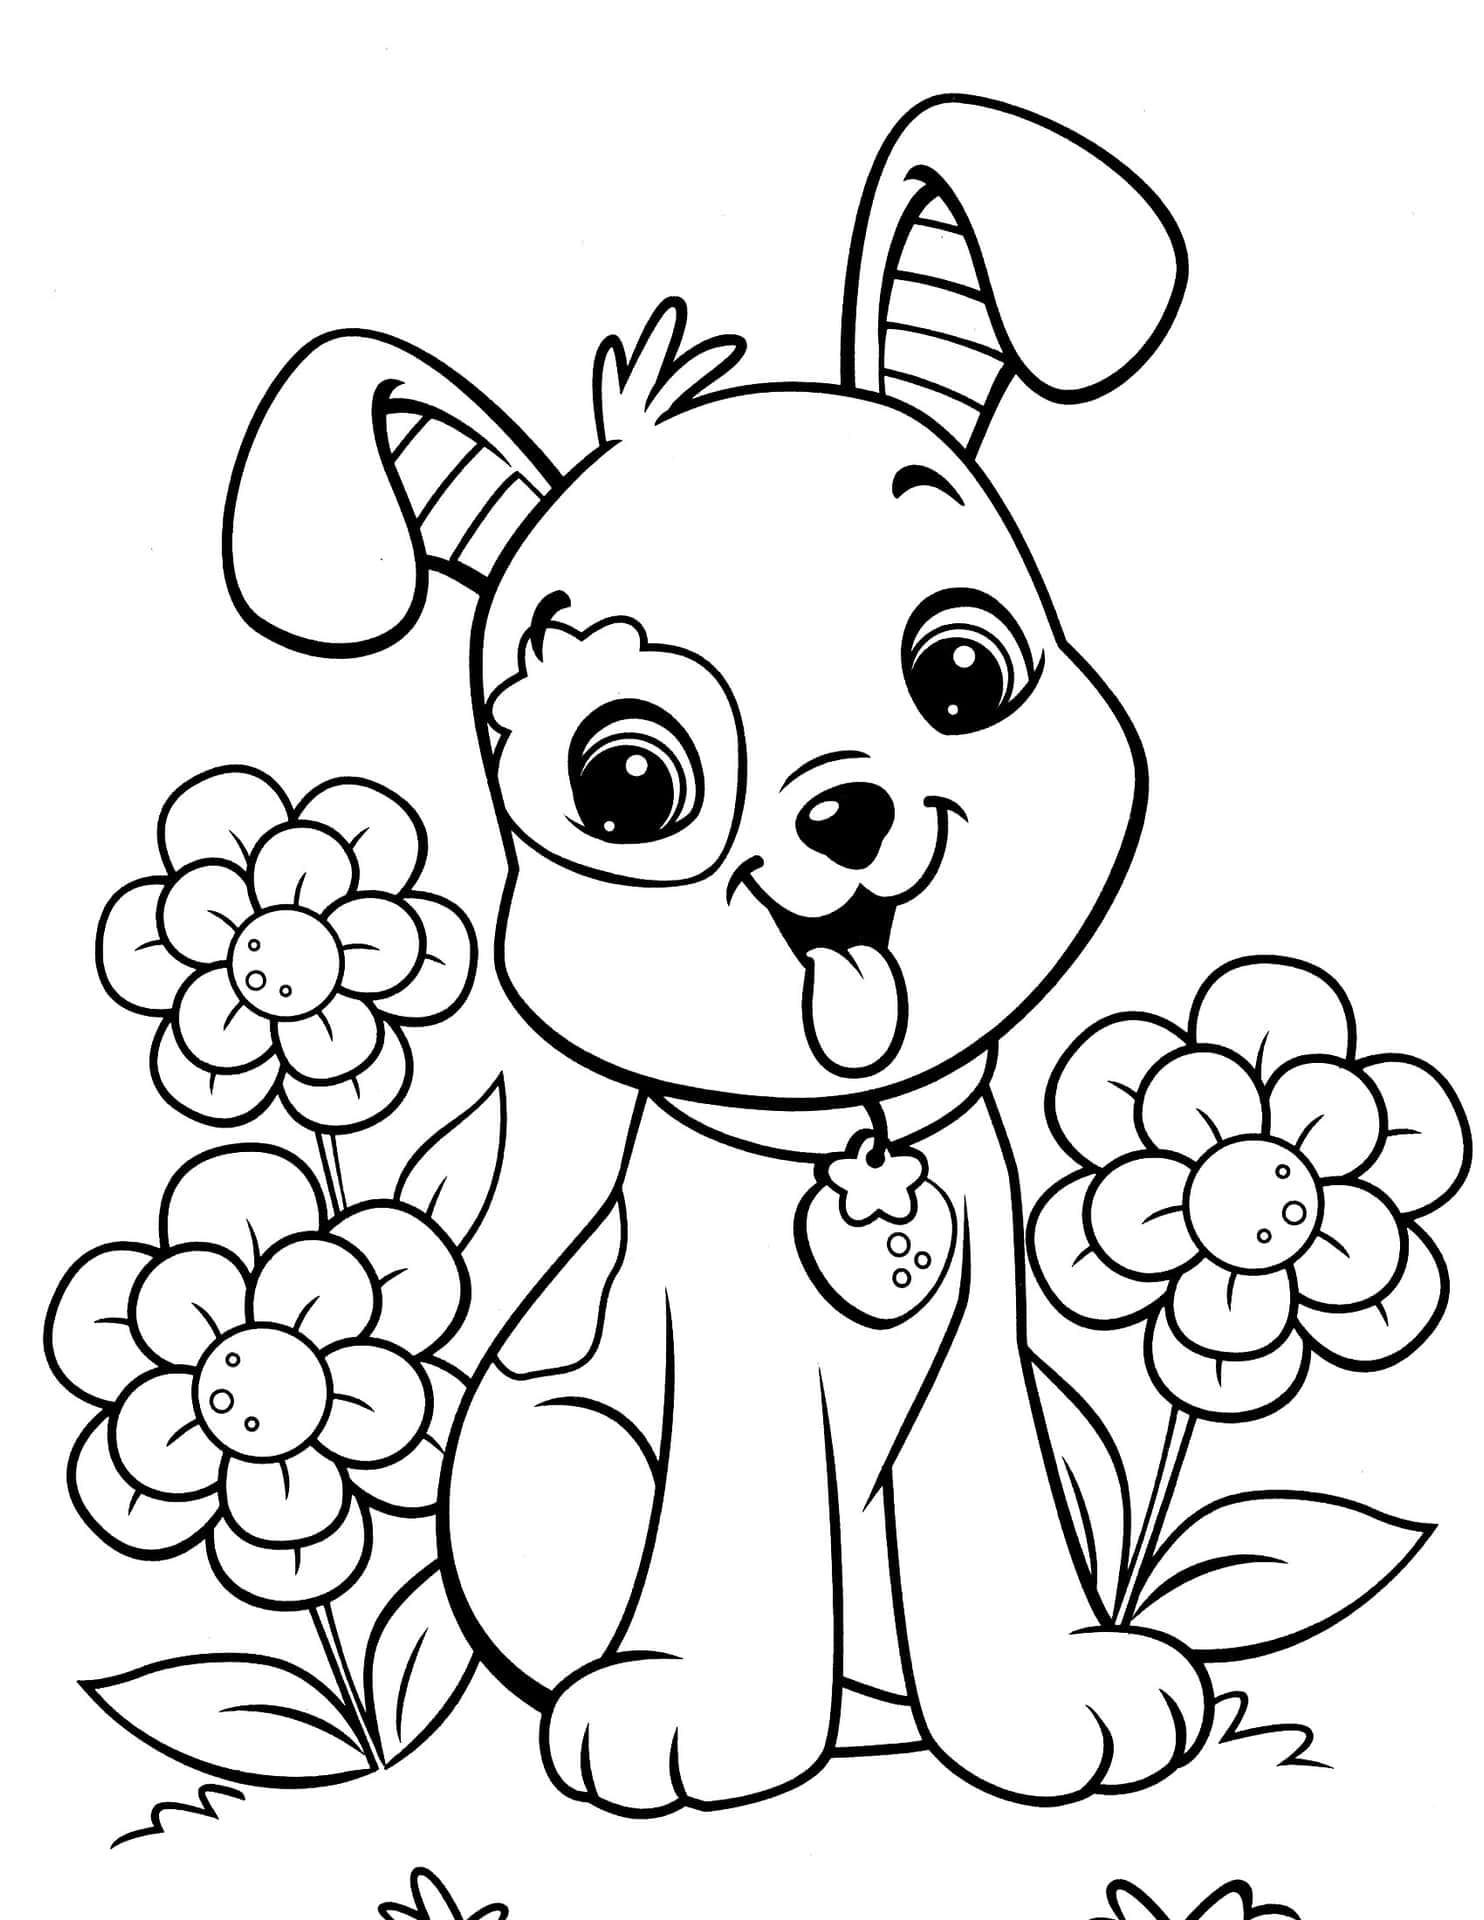 A Dog Coloring Page With Flowers